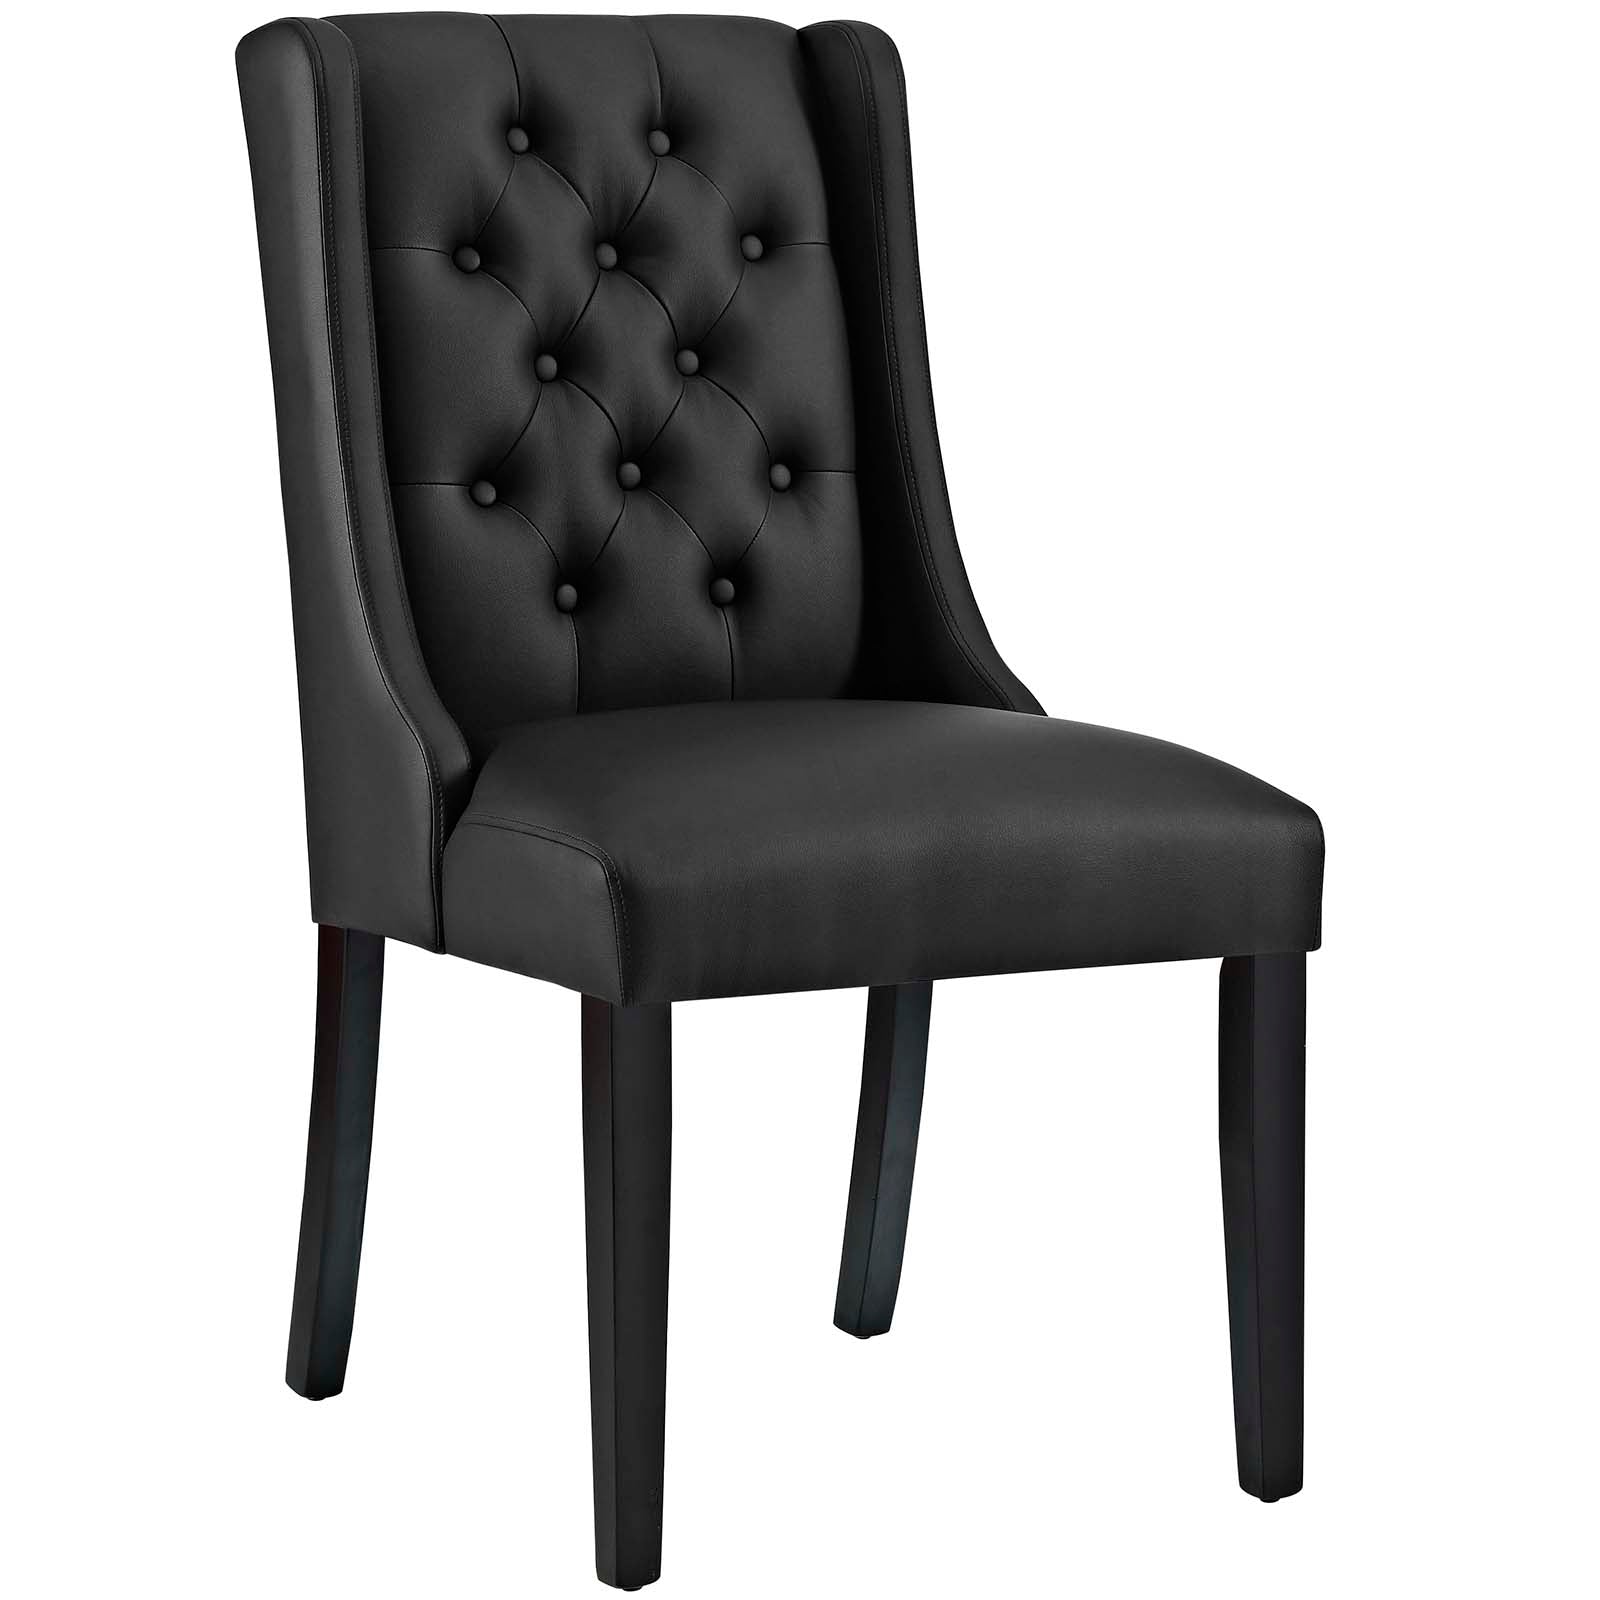 Modway Dining Chairs - Baronet Vinyl 38.5 " H Dining Chair Black